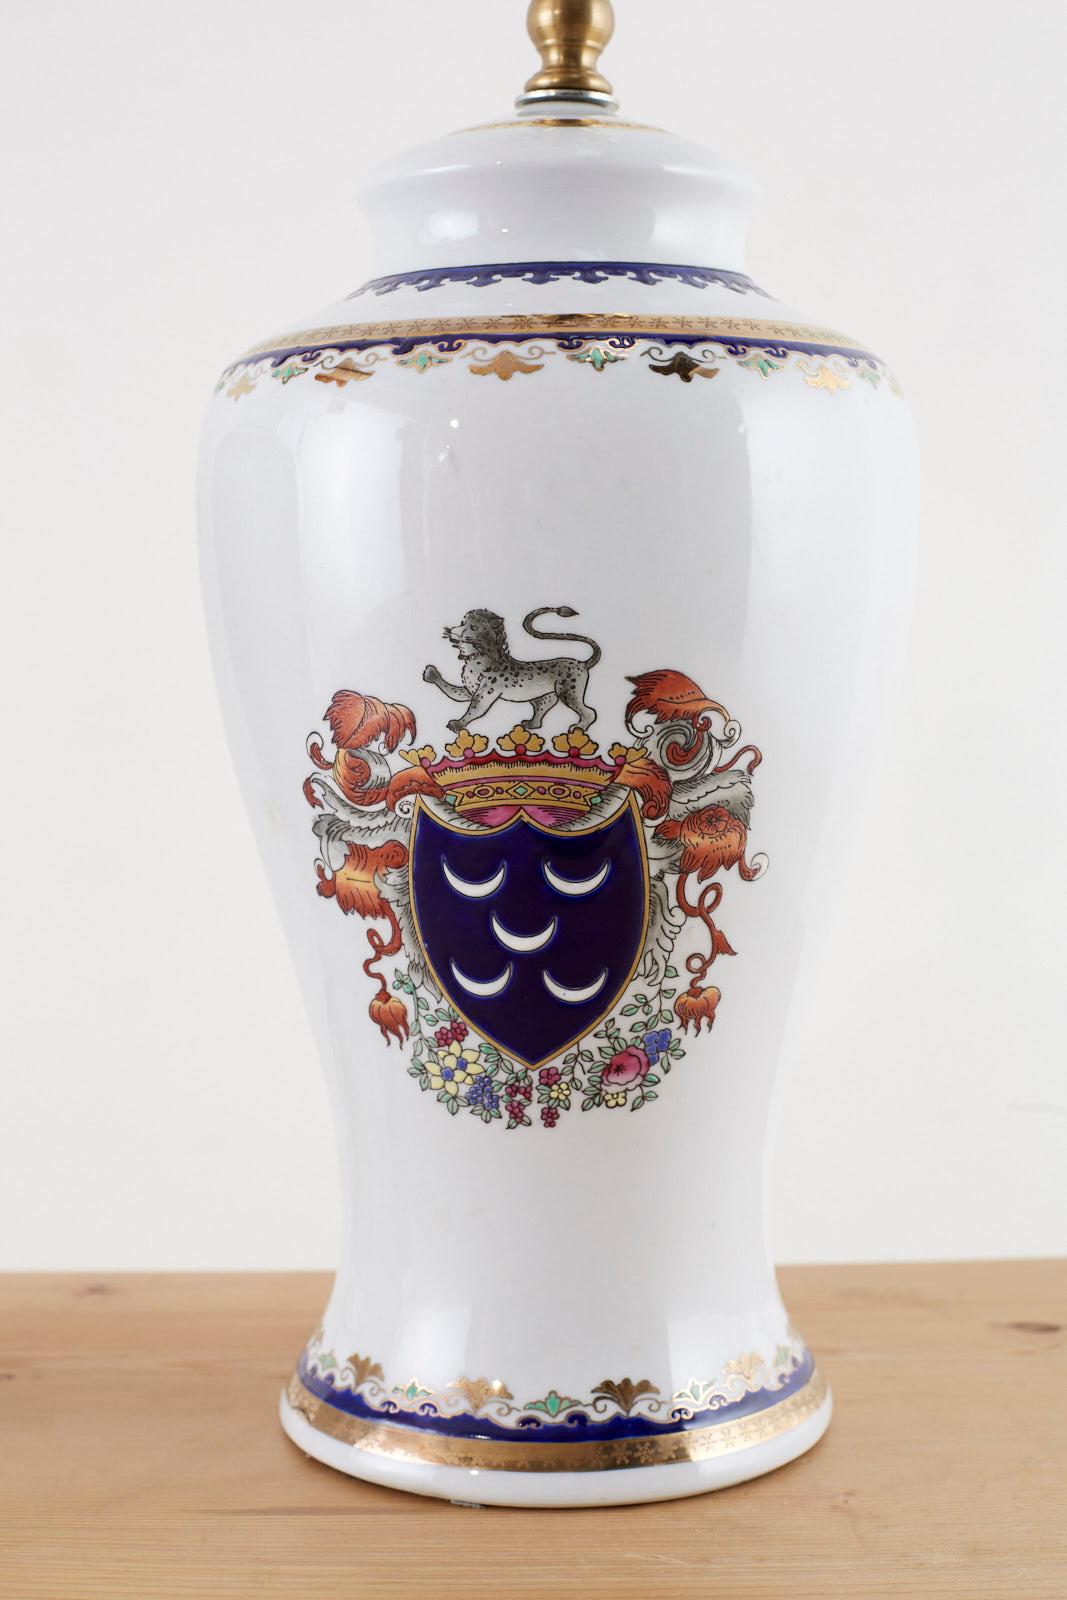 Stately pair of porcelain jar or vase table lamps featuring British style coat of arms motifs on each side. Each side depicts a royal shield in Lapis surmounted by a gold crown with a lion on top. Beautifully decorated with gilt highlights and